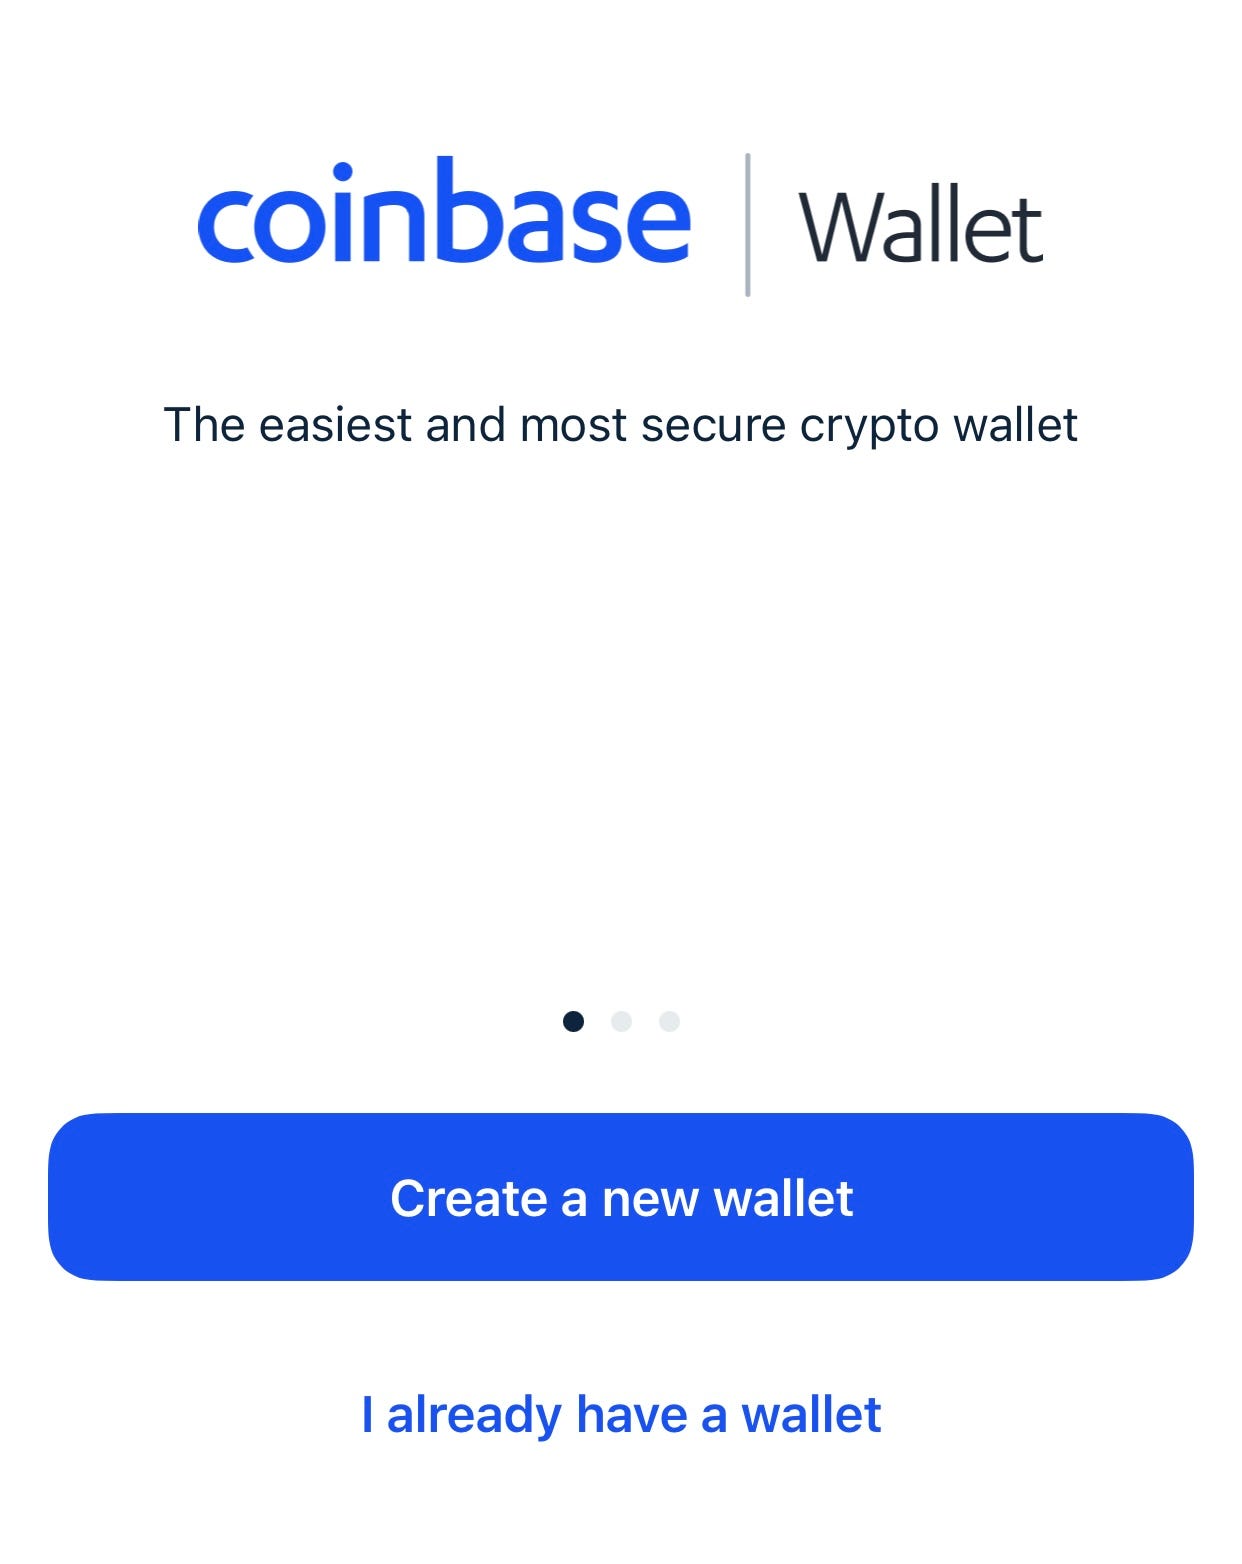 How to make a new bitcoin wallet on coinbase